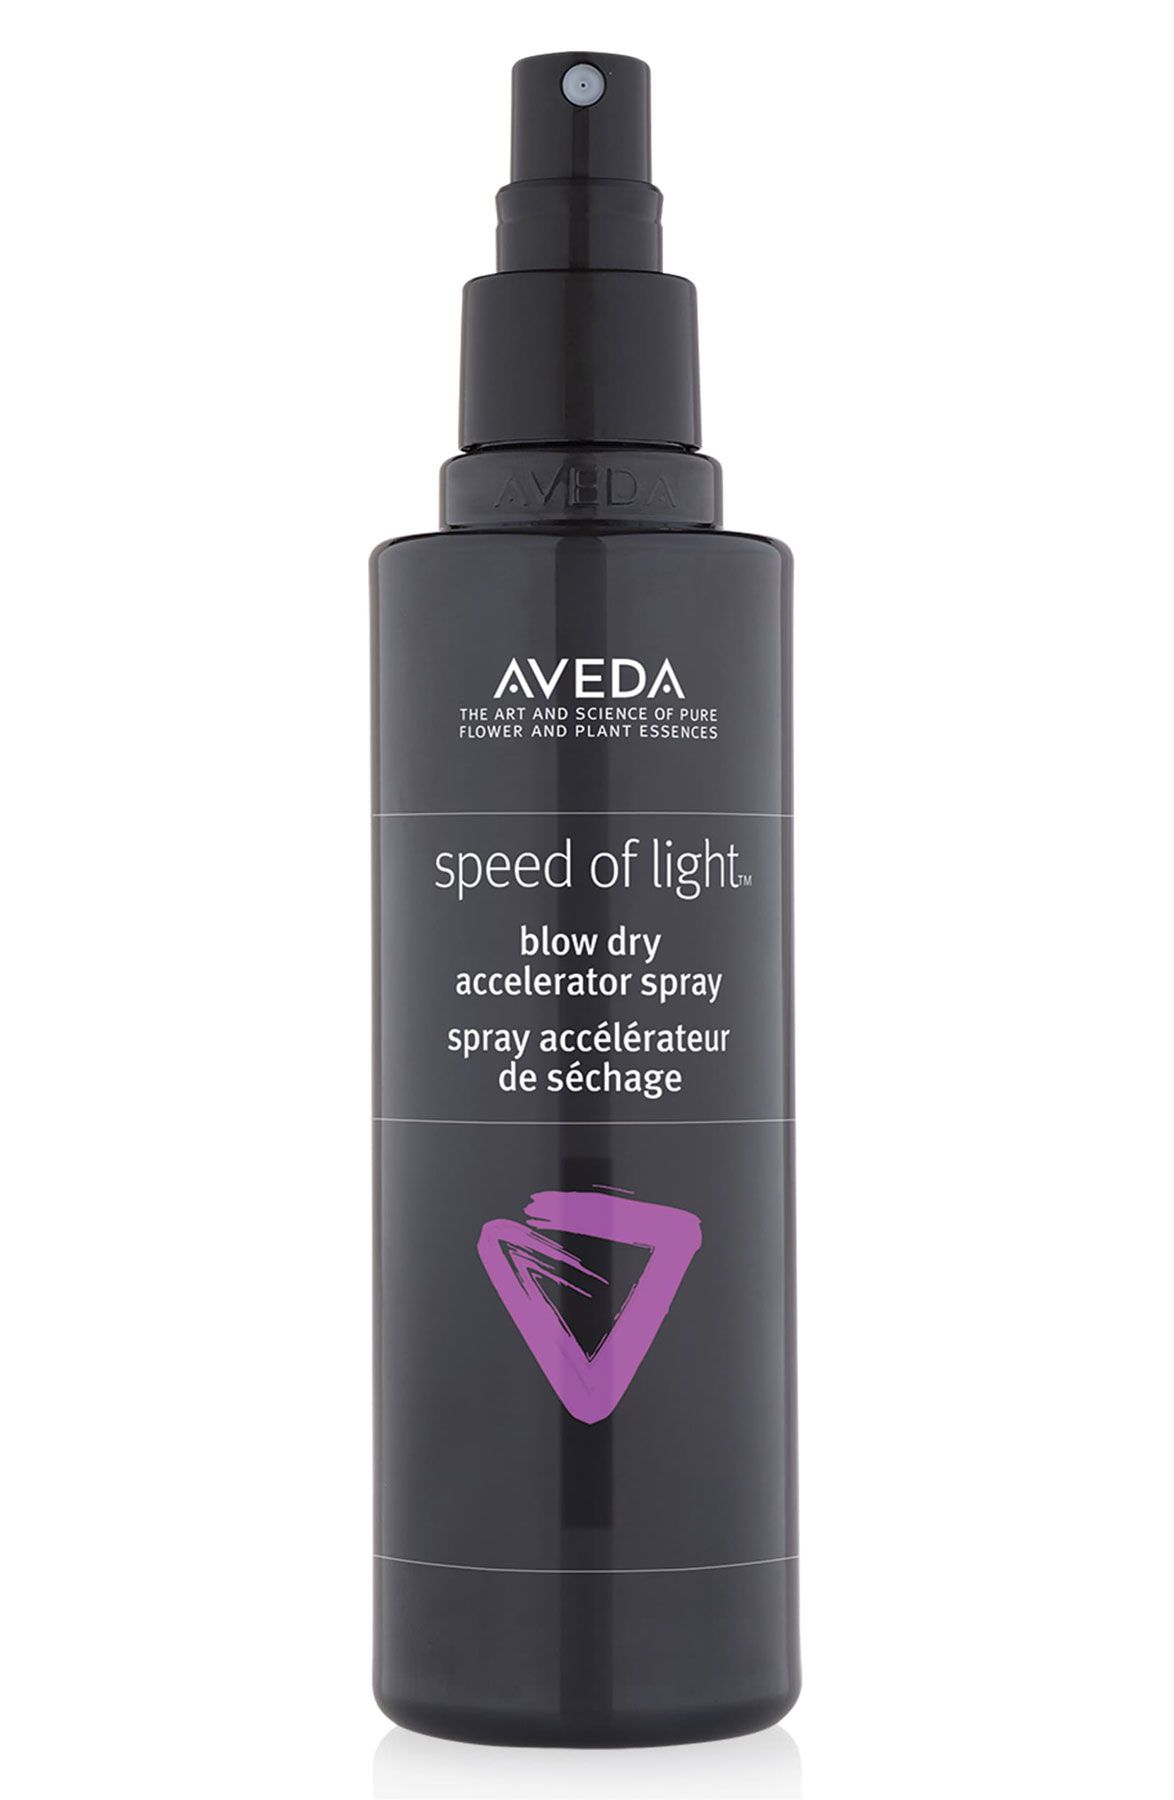 Cleverest Items 2020 - Aveda Speed of Light Blow Dry Accelerator Spray